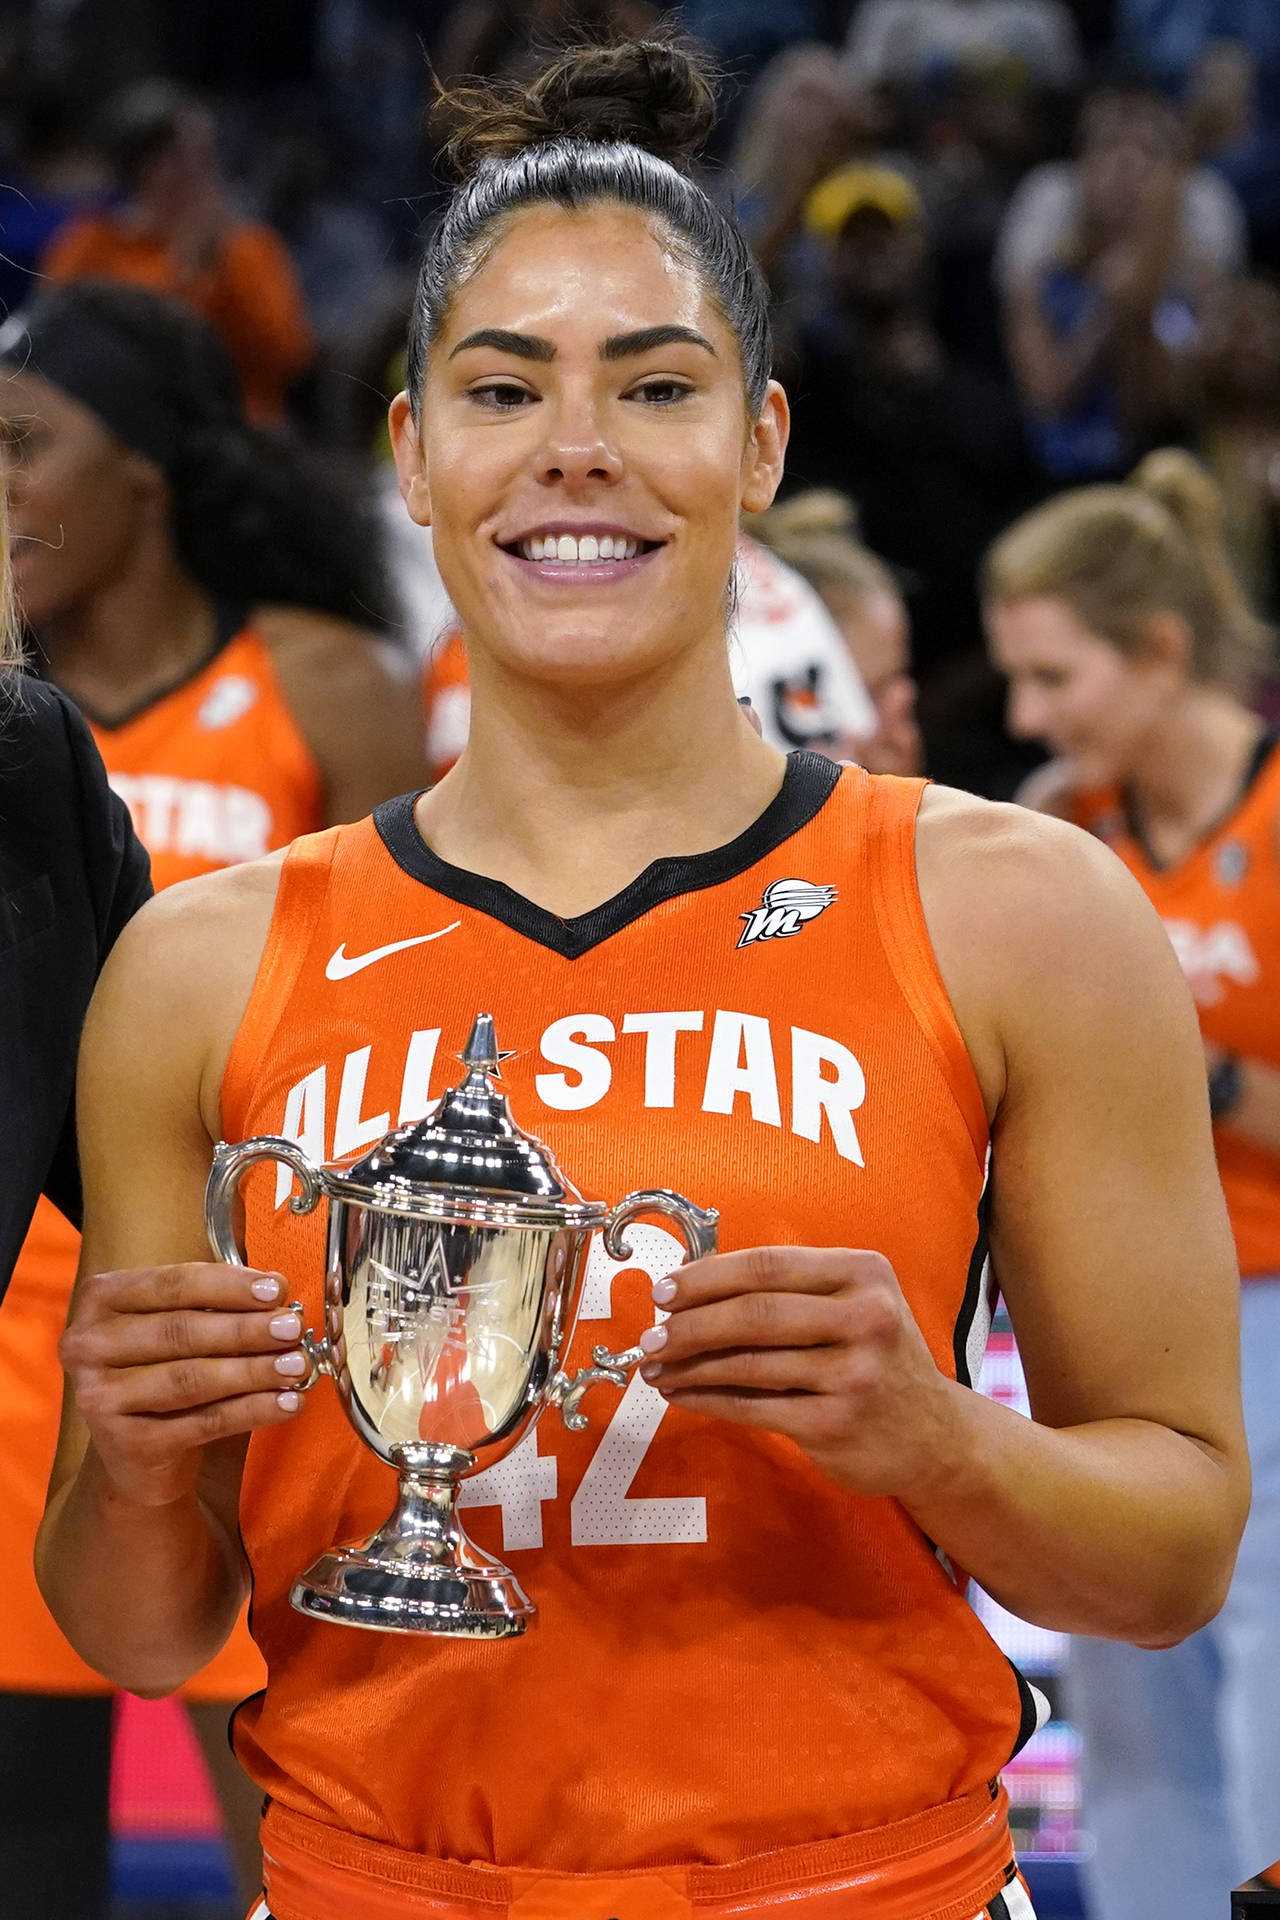 WNBA Coach Becky Hammon Doesn't Need the NBA's Approval